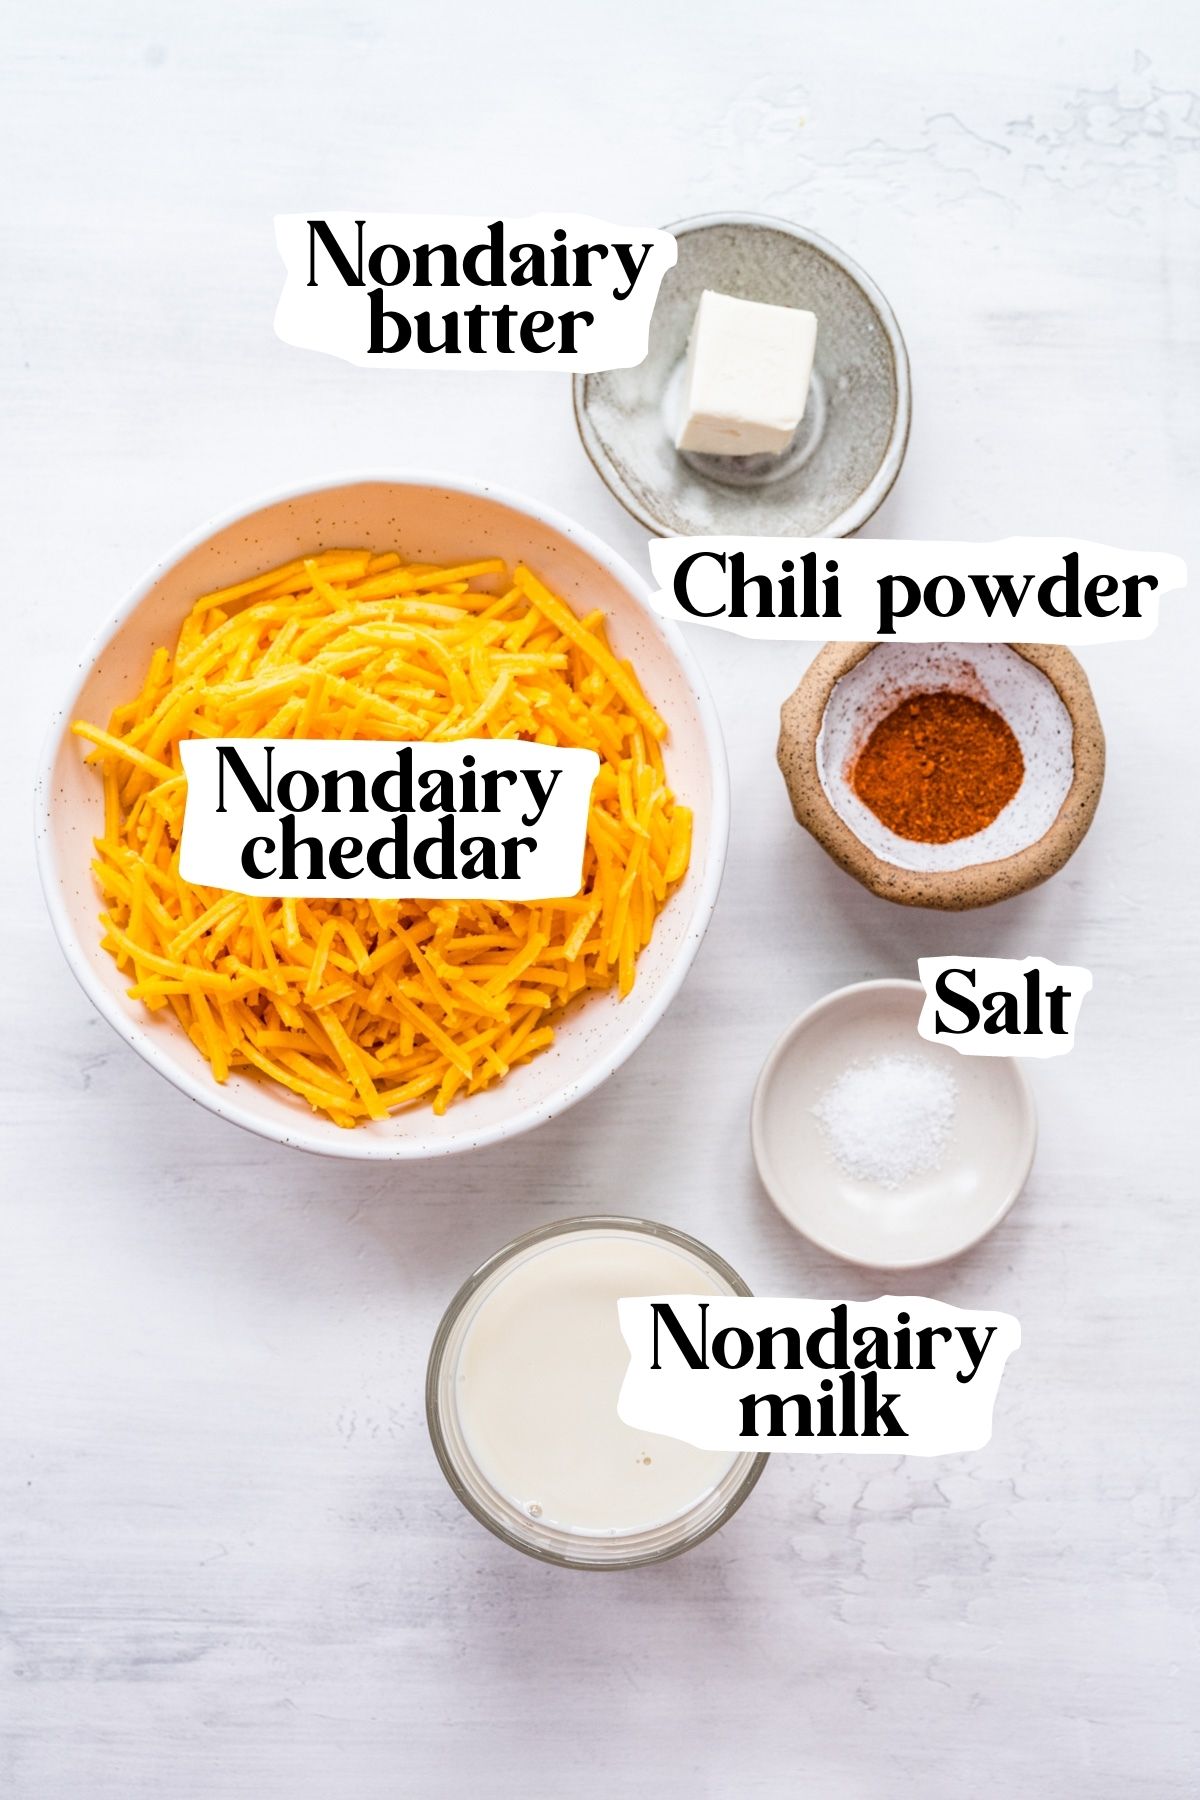 Overhead view of vegan cheese sauce, including nondairy cheddar and chili powder.